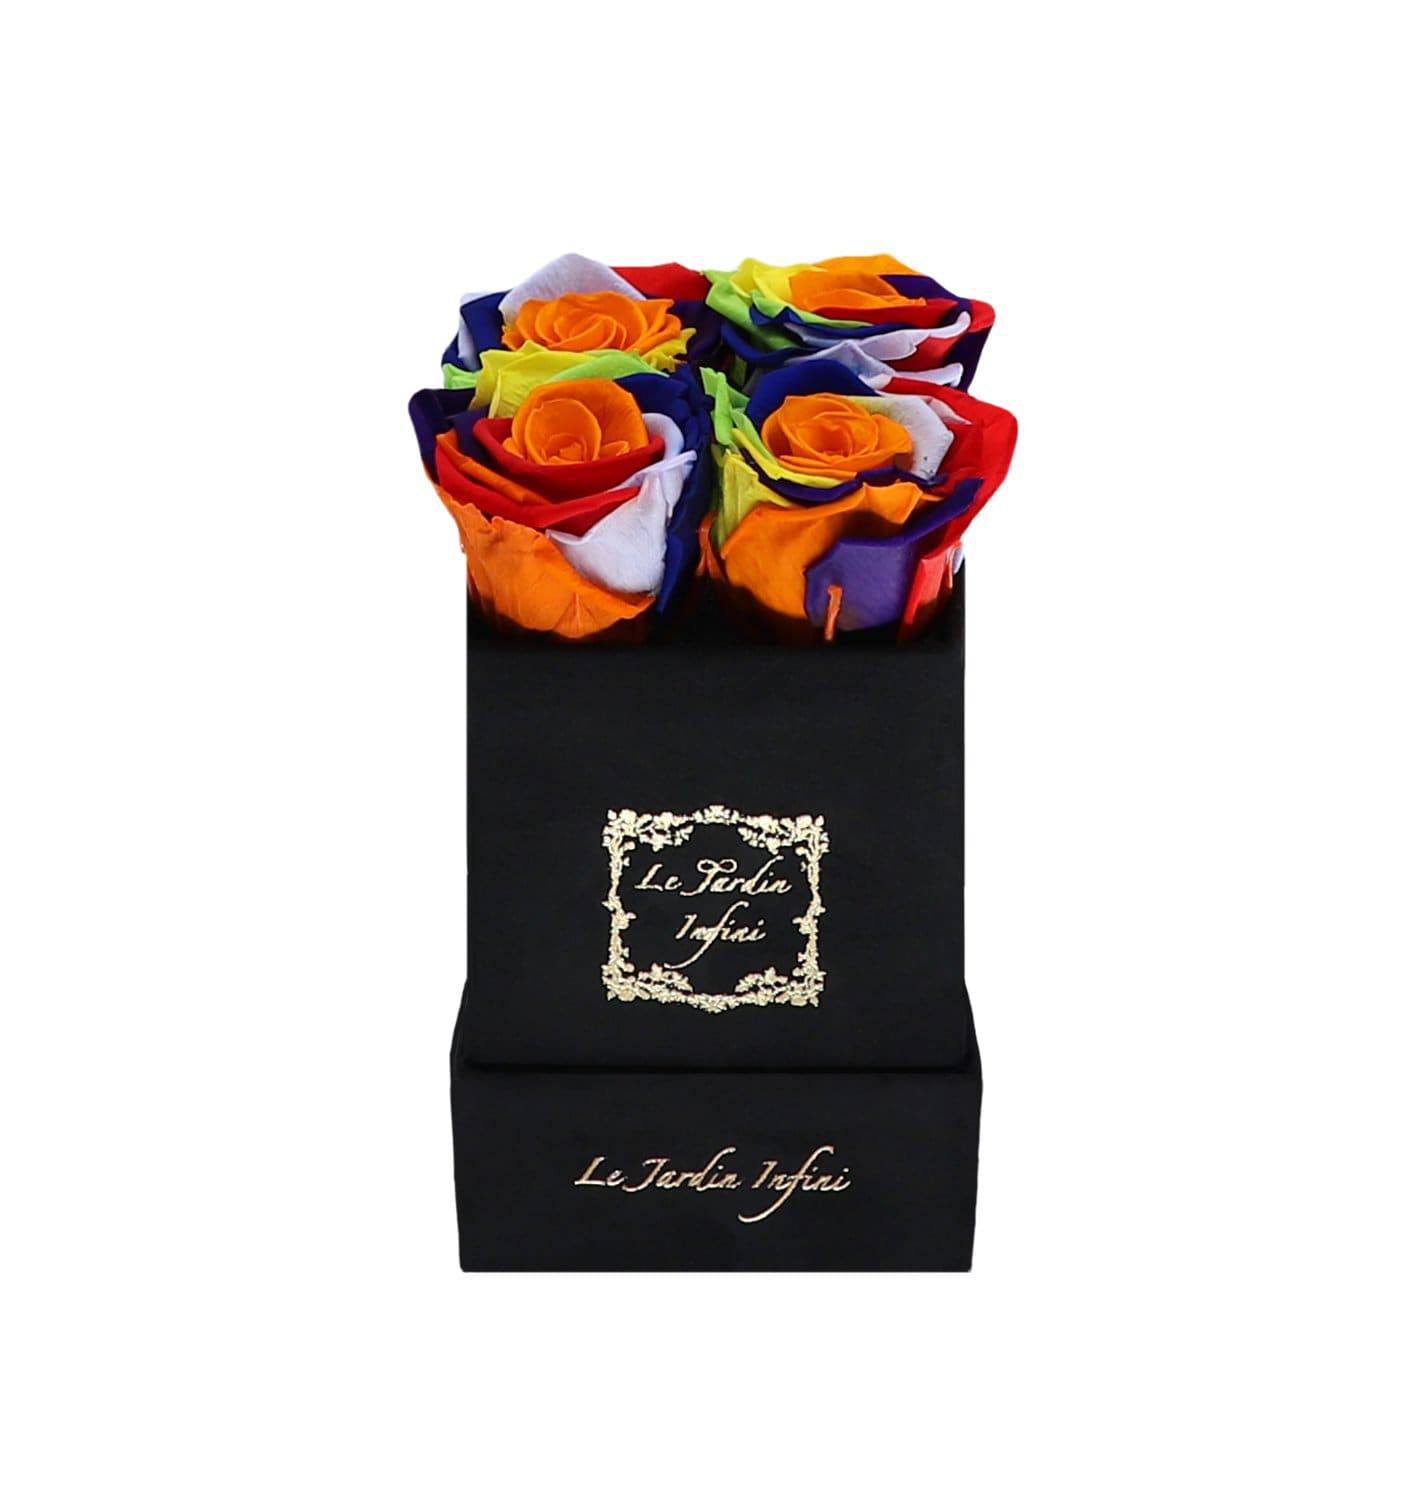 Rainbow Preserved Roses - Small Square Black Suede Box - Le Jardin Infini Roses in a Box